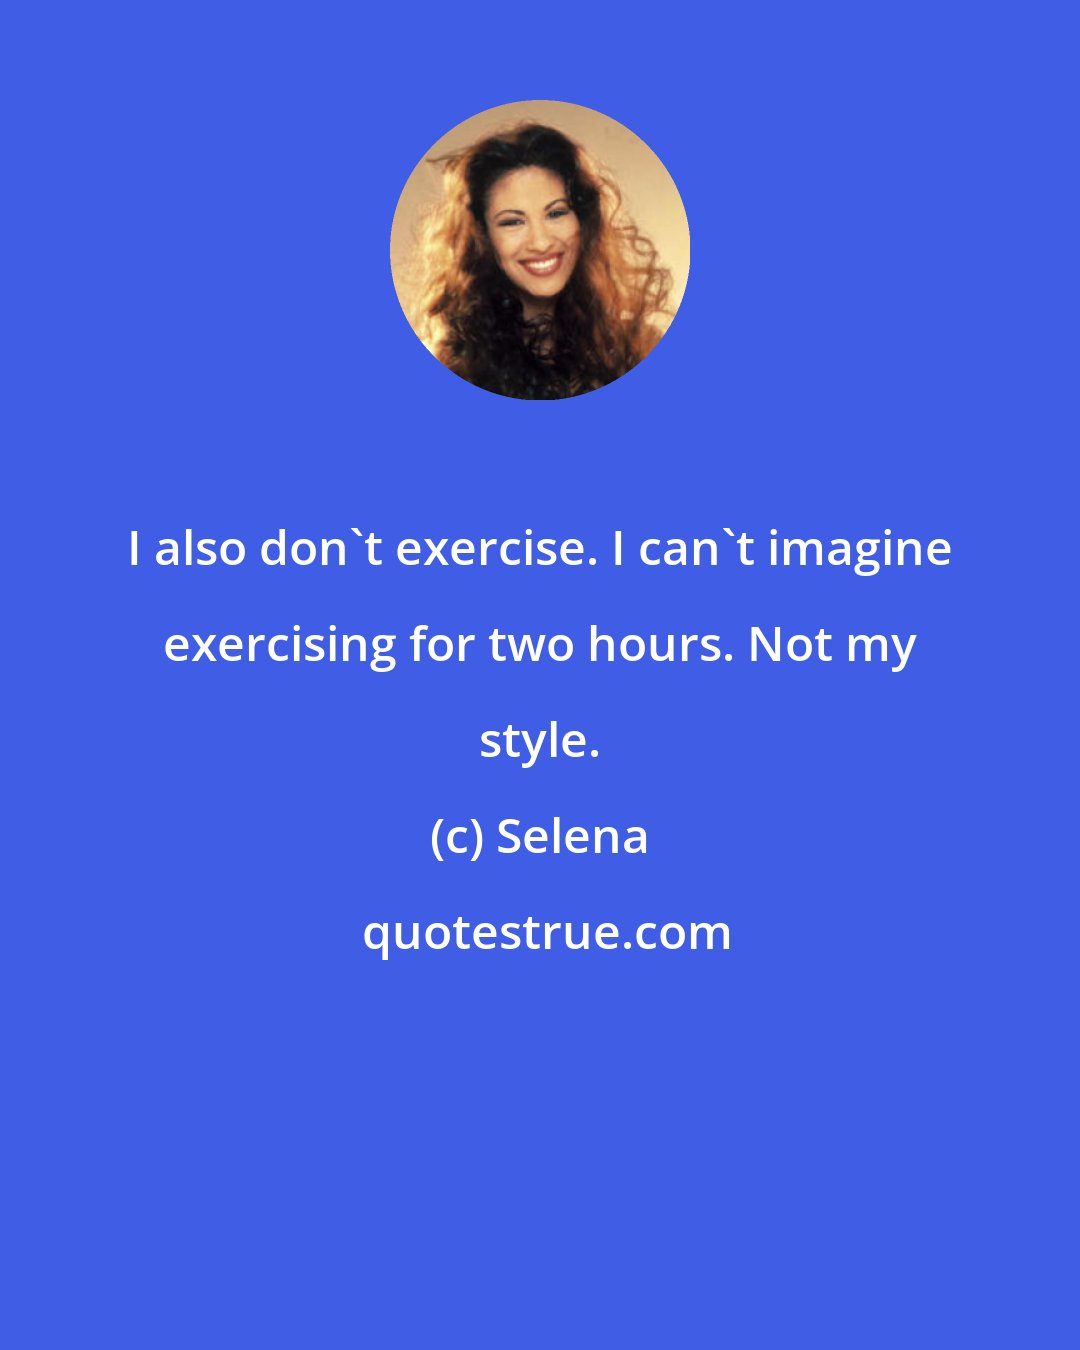 Selena: I also don't exercise. I can't imagine exercising for two hours. Not my style.